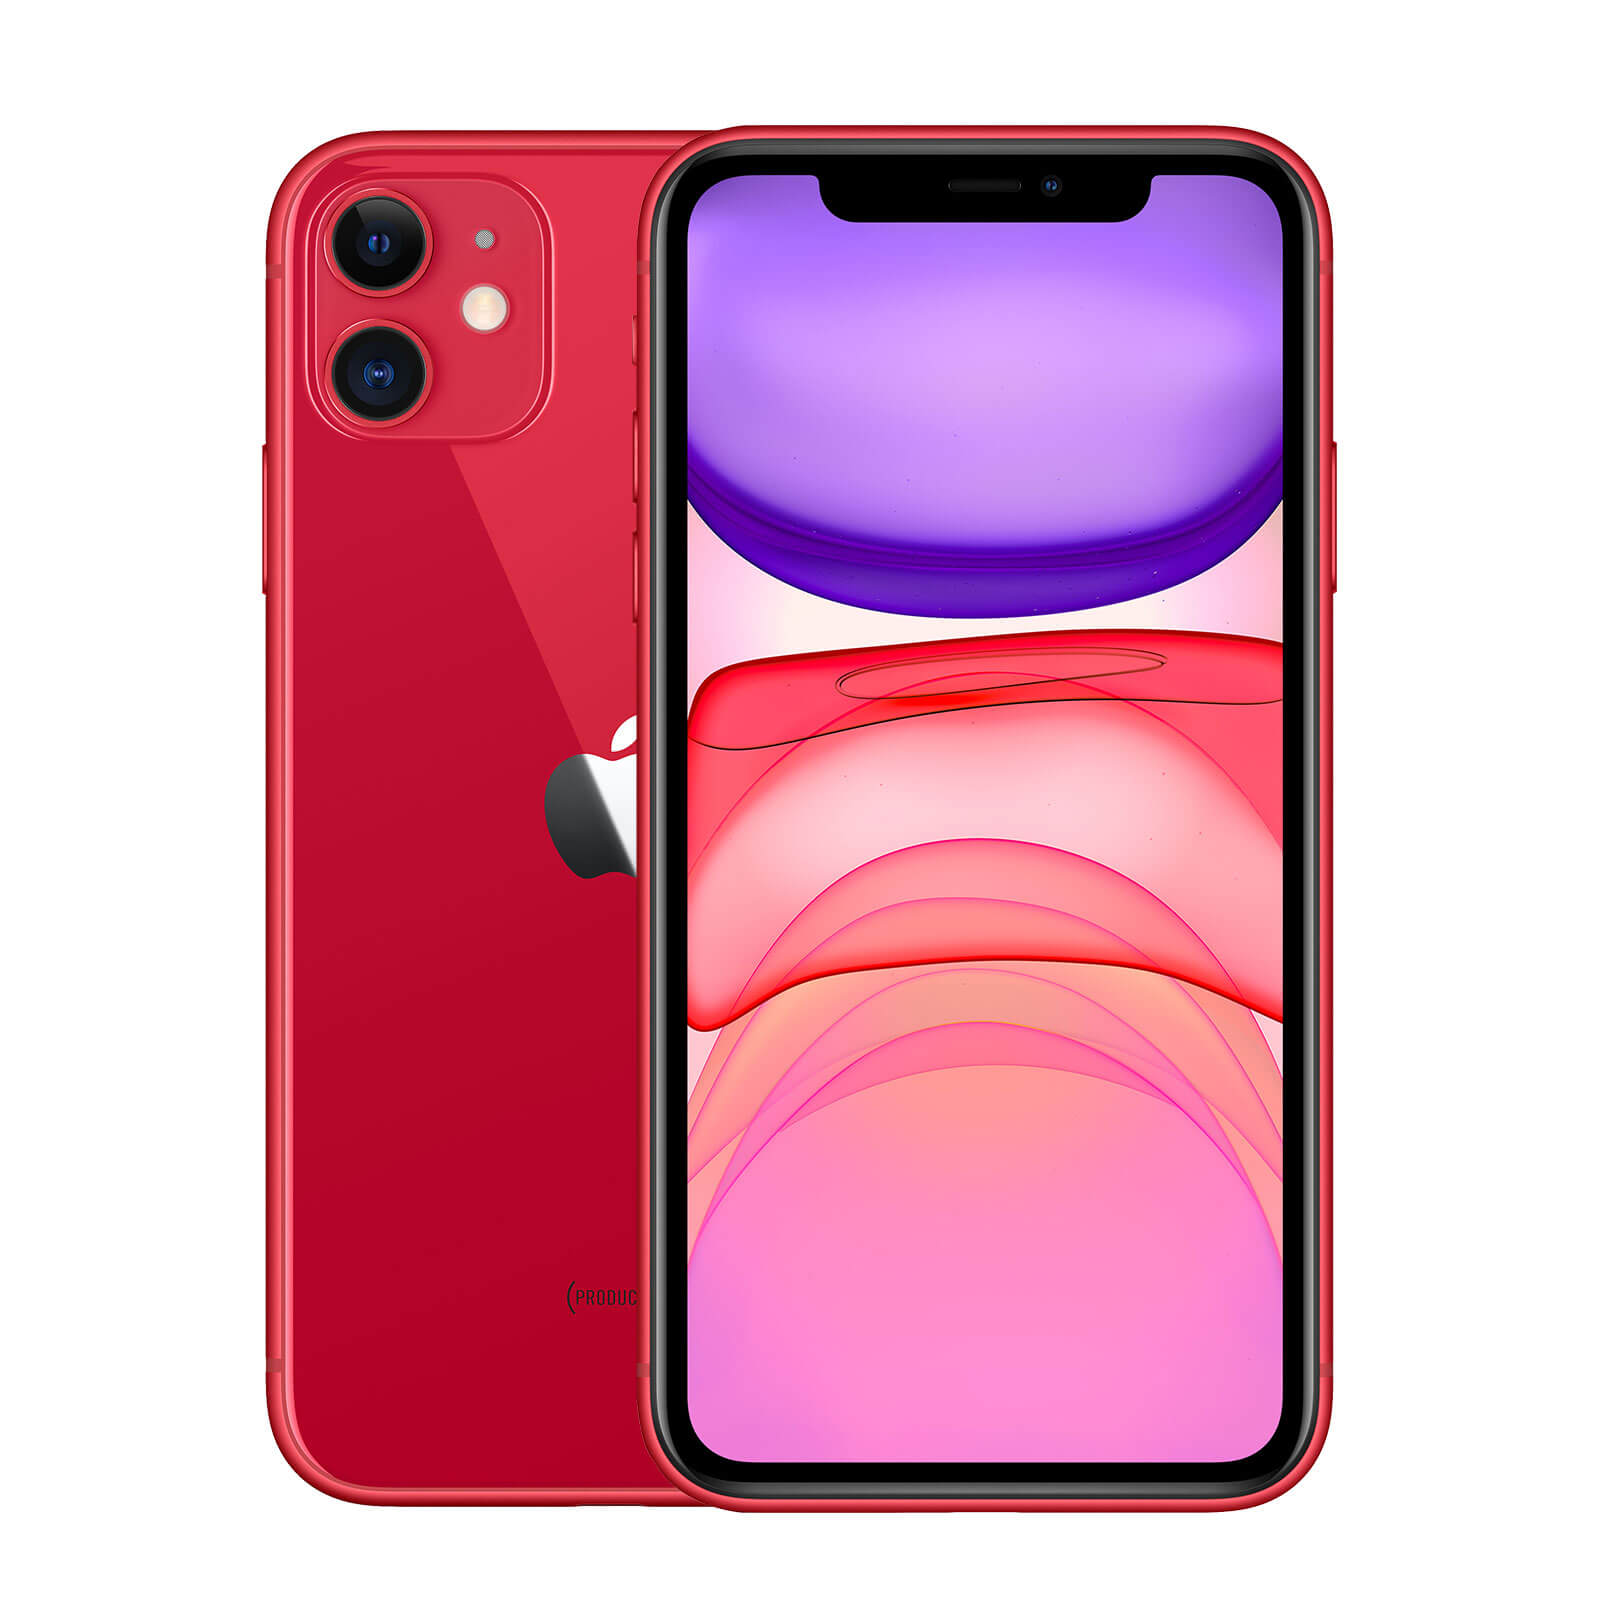 Apple iPhone 11 128GB Product Red Gut - Ohne Vertrag